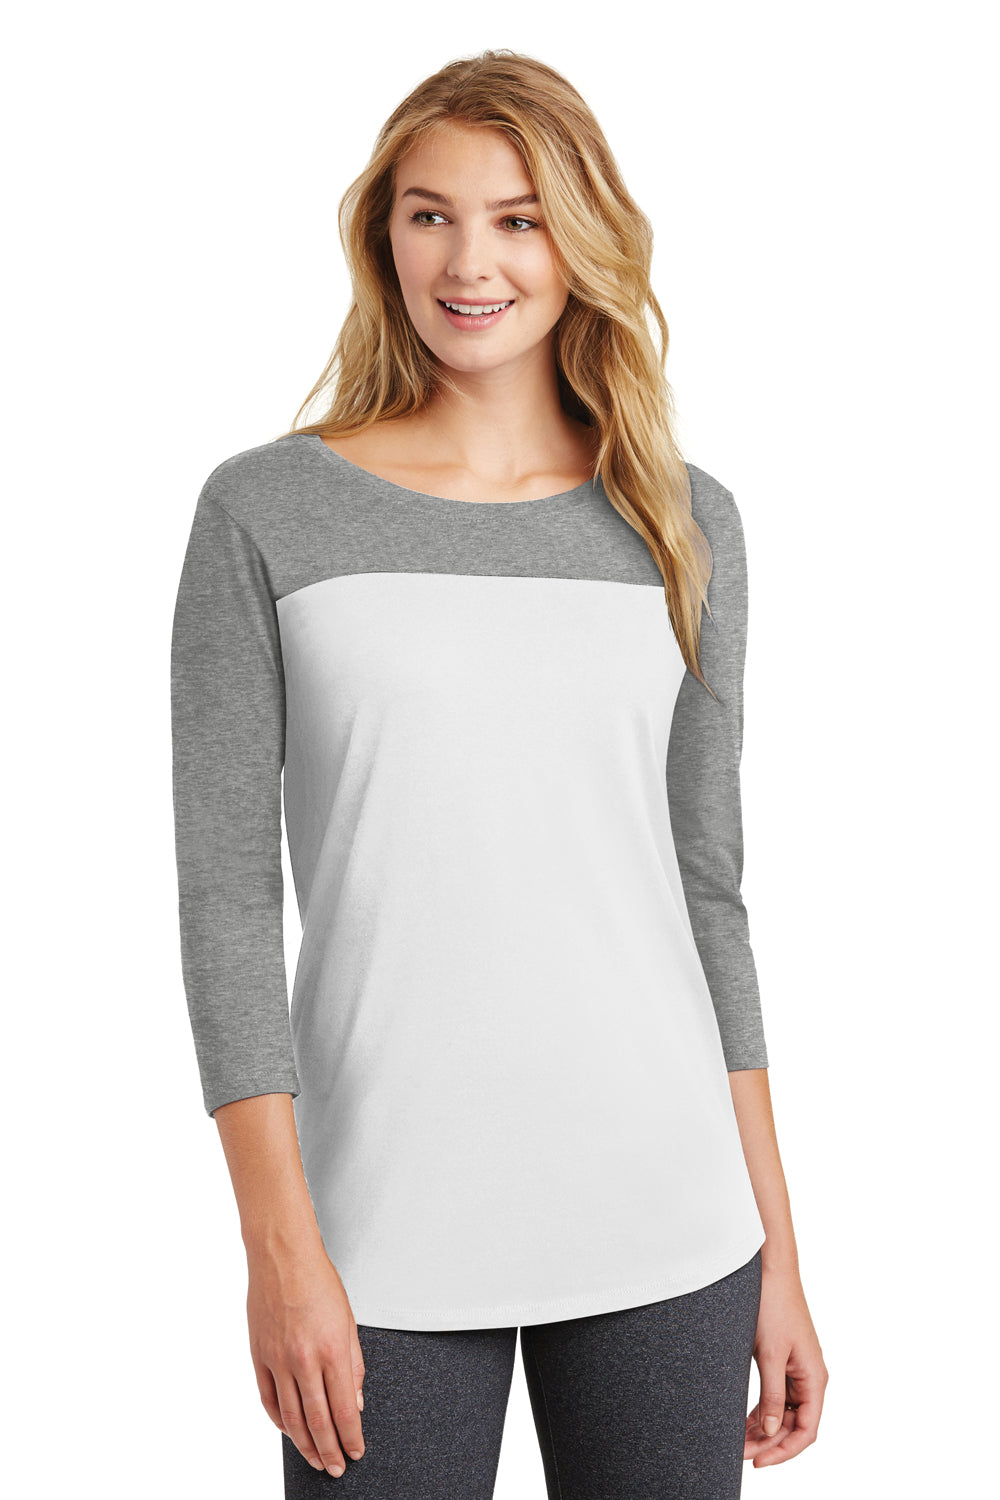 District DT2700 Womens Rally 3/4 Sleeve Wide Neck T-Shirt White/Grey Front